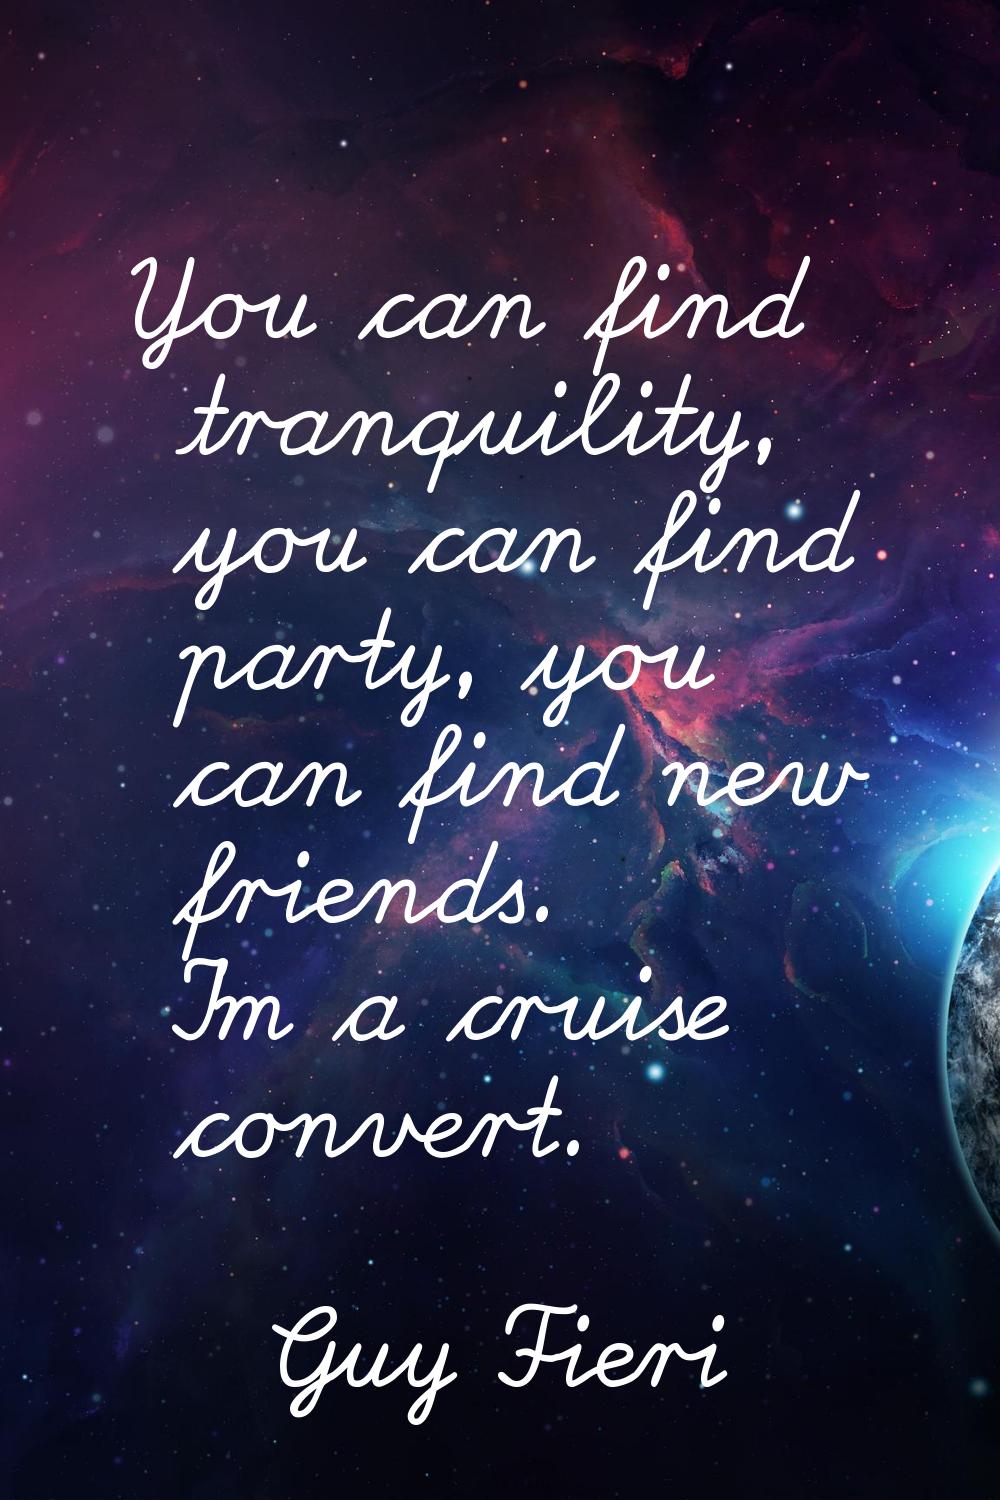 You can find tranquility, you can find party, you can find new friends. I'm a cruise convert.